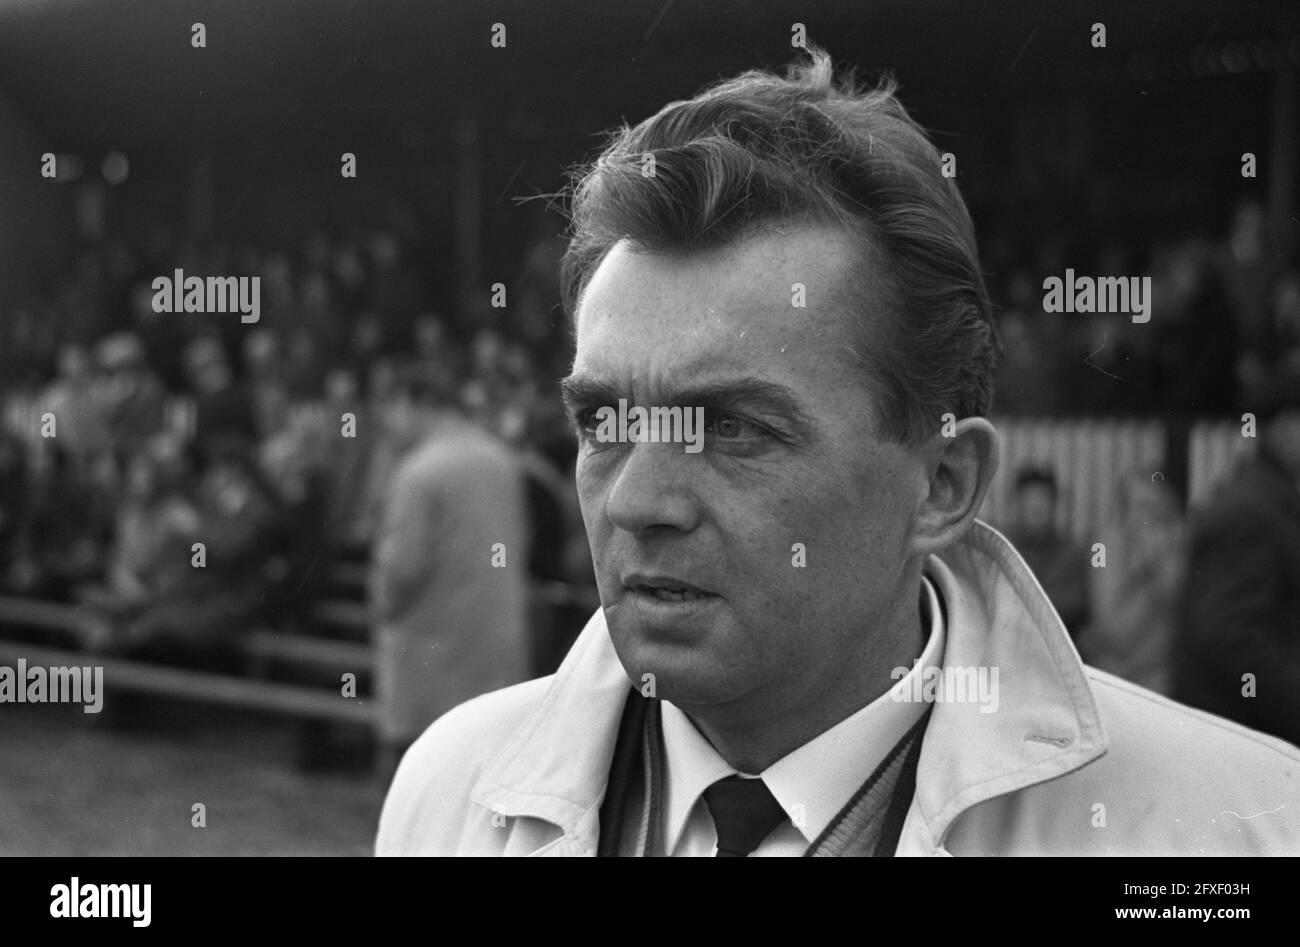 Trainer Ernst Happel of ADO, October 31, 1965, portraits, sports, trainers, soccer, The Netherlands, 20th century press agency photo, news to remember, documentary, historic photography 1945-1990, visual stories, human history of the Twentieth Century, capturing moments in time Stock Photo